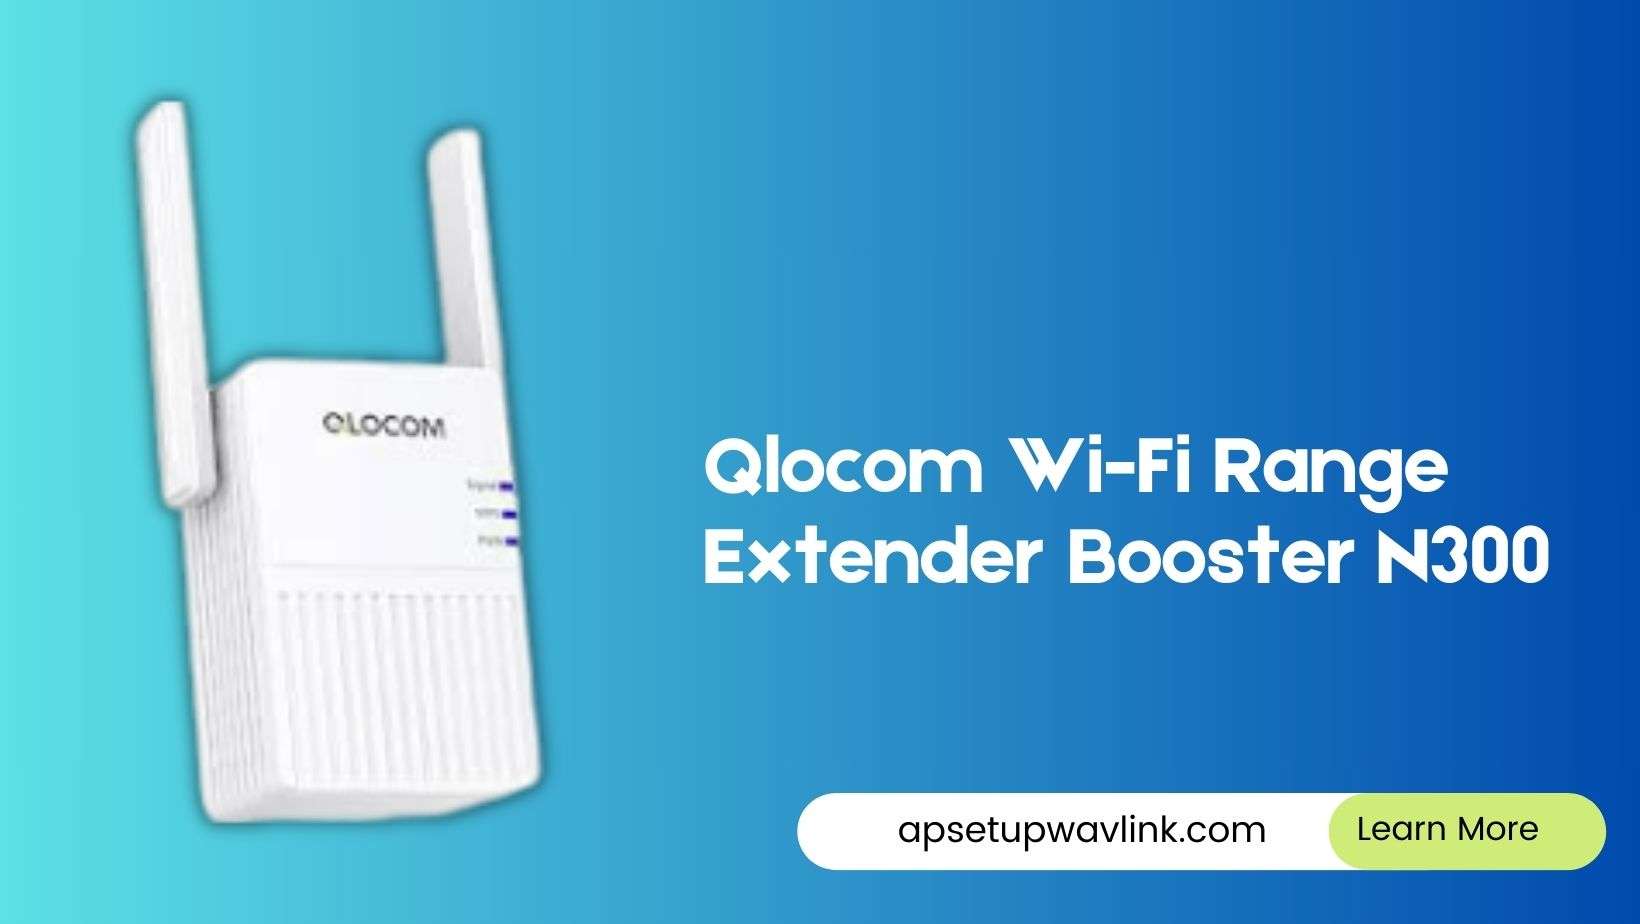 You are currently viewing Qlocom Wi-Fi Range Extender Booster N300